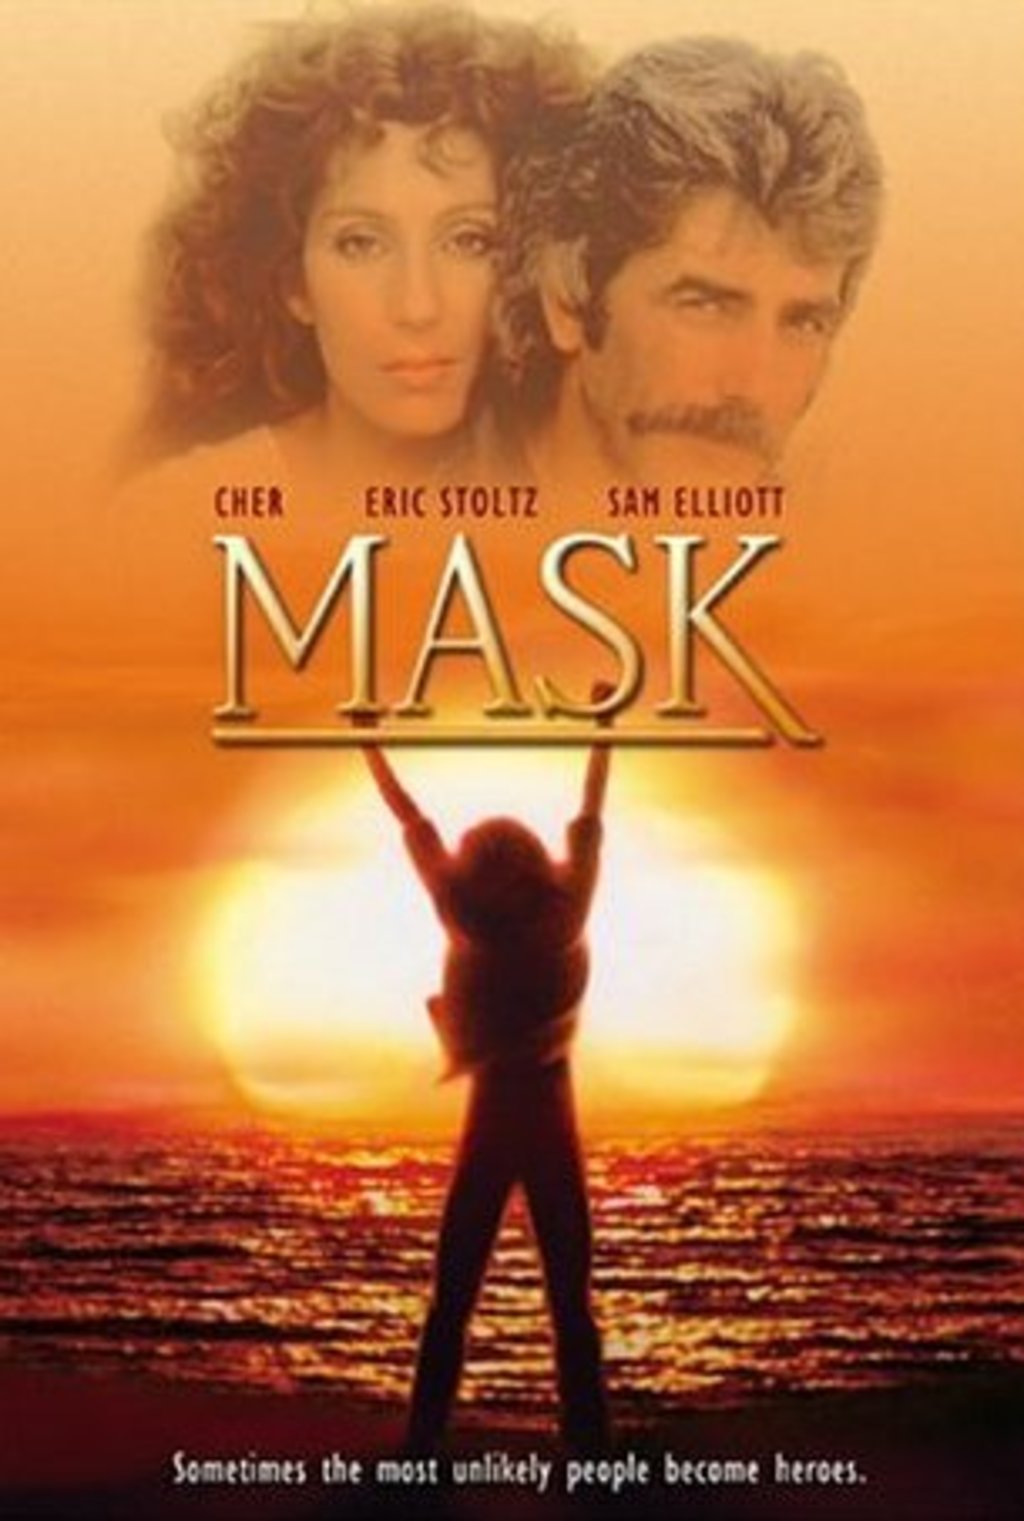 mask 1985 full movie free download